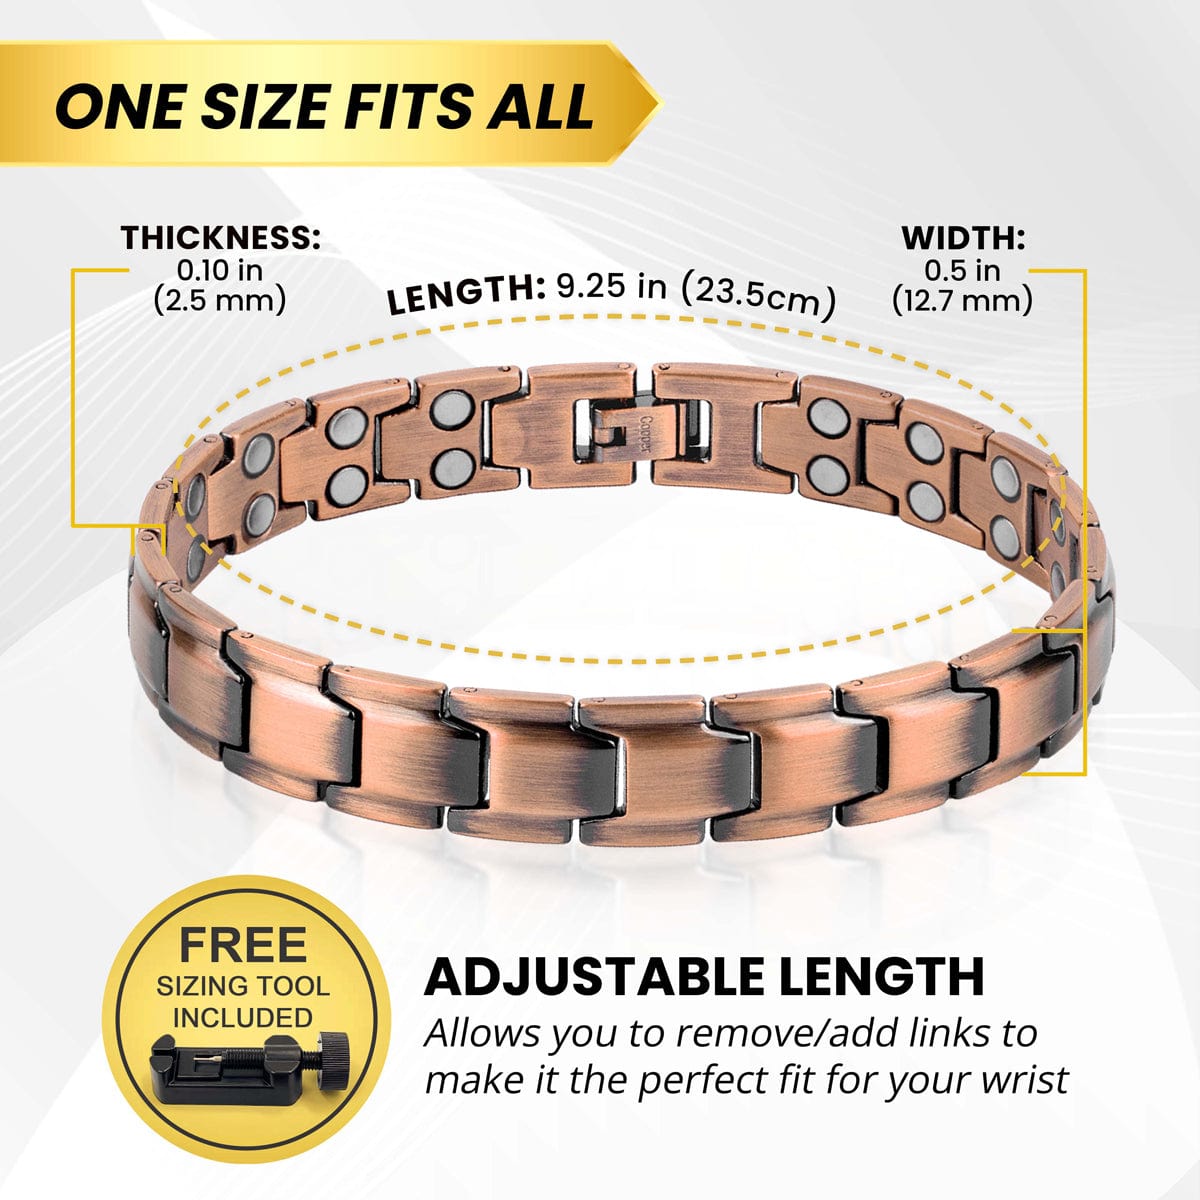 Hand Watch Chain Style Luxuries Fashion Men Gift Jewelry Pure Copper Dark  Red Link Chain Bracelet Power Health Magnetic Bracelet For Men From  Mina8868, $7.47 | DHgate.Com